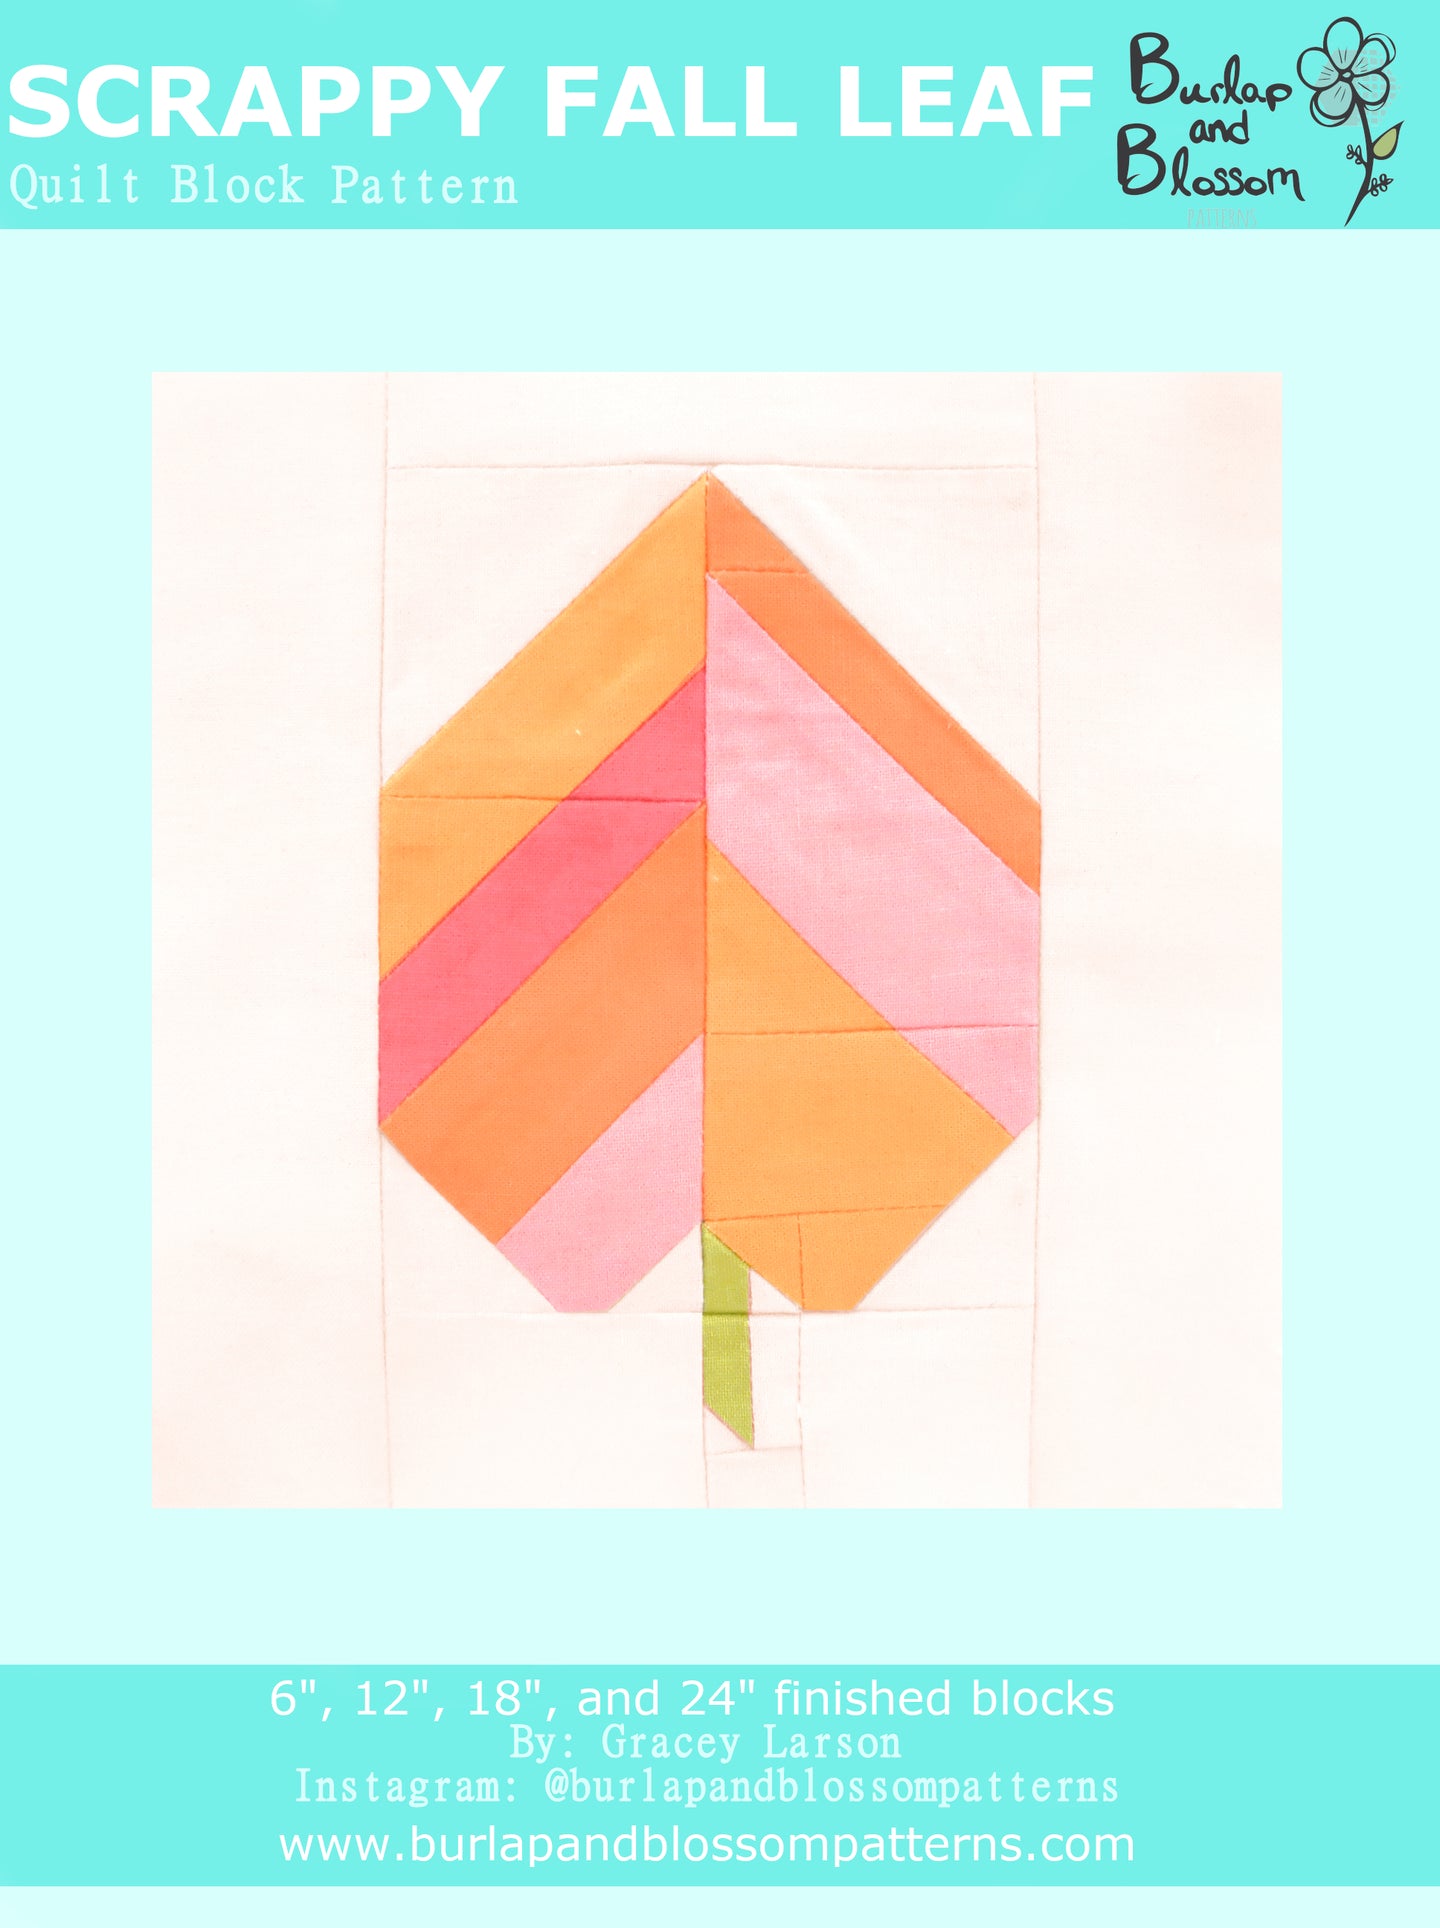 Pattern, Scrappy Fall Leaf Quilt Block by Burlap and Blossom (digital download)